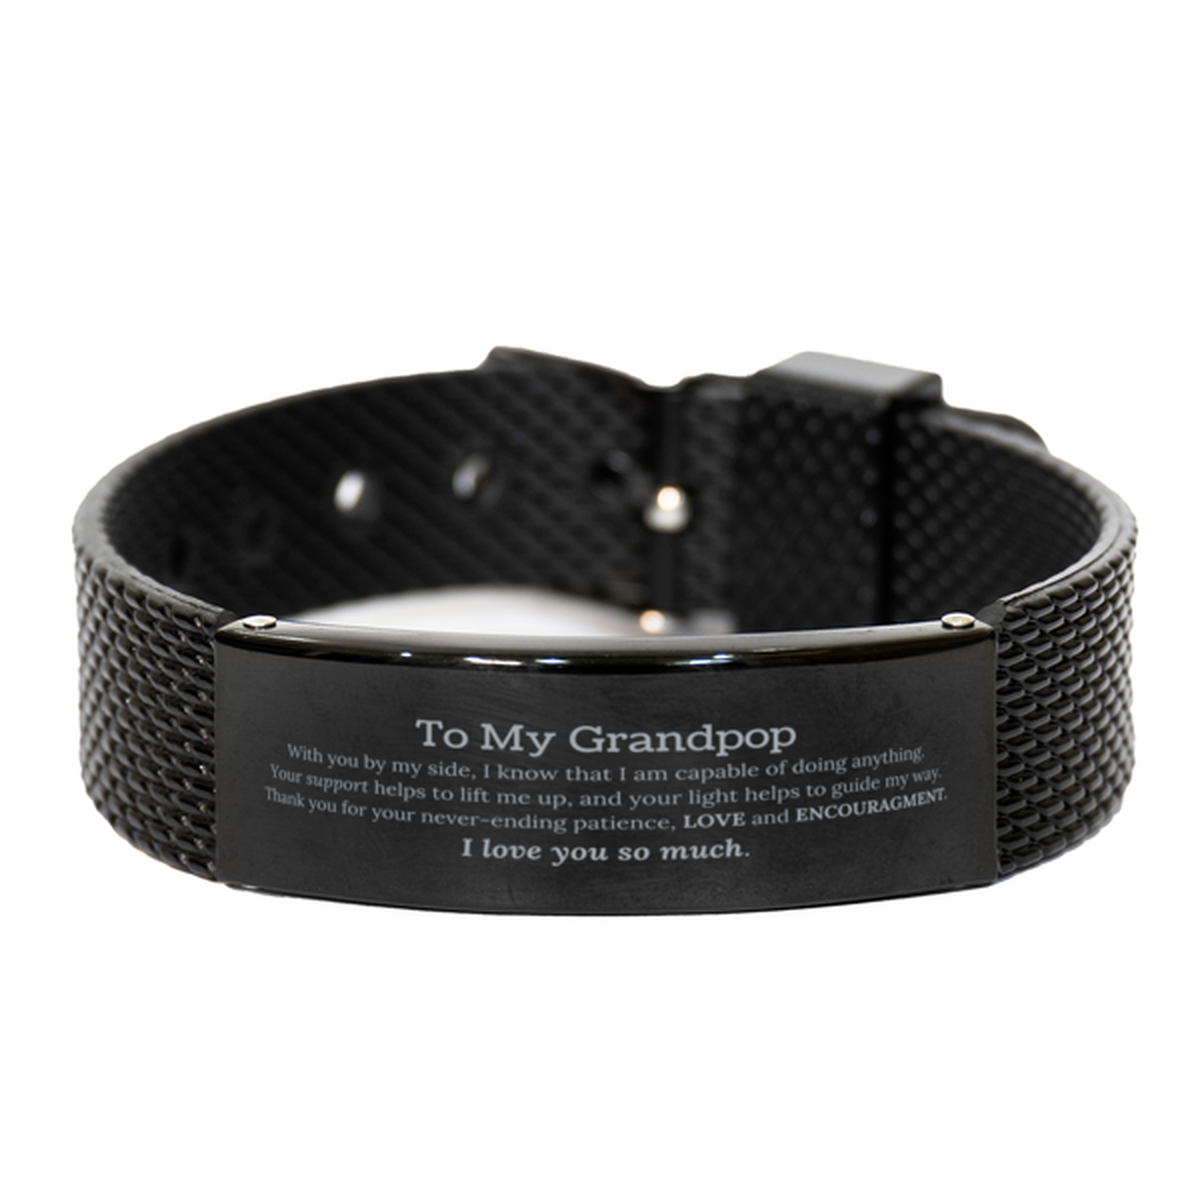 Appreciation Grandpop Black Shark Mesh Bracelet Gifts, To My Grandpop Birthday Christmas Wedding Keepsake Gifts for Grandpop With you by my side, I know that I am capable of doing anything. I love you so much